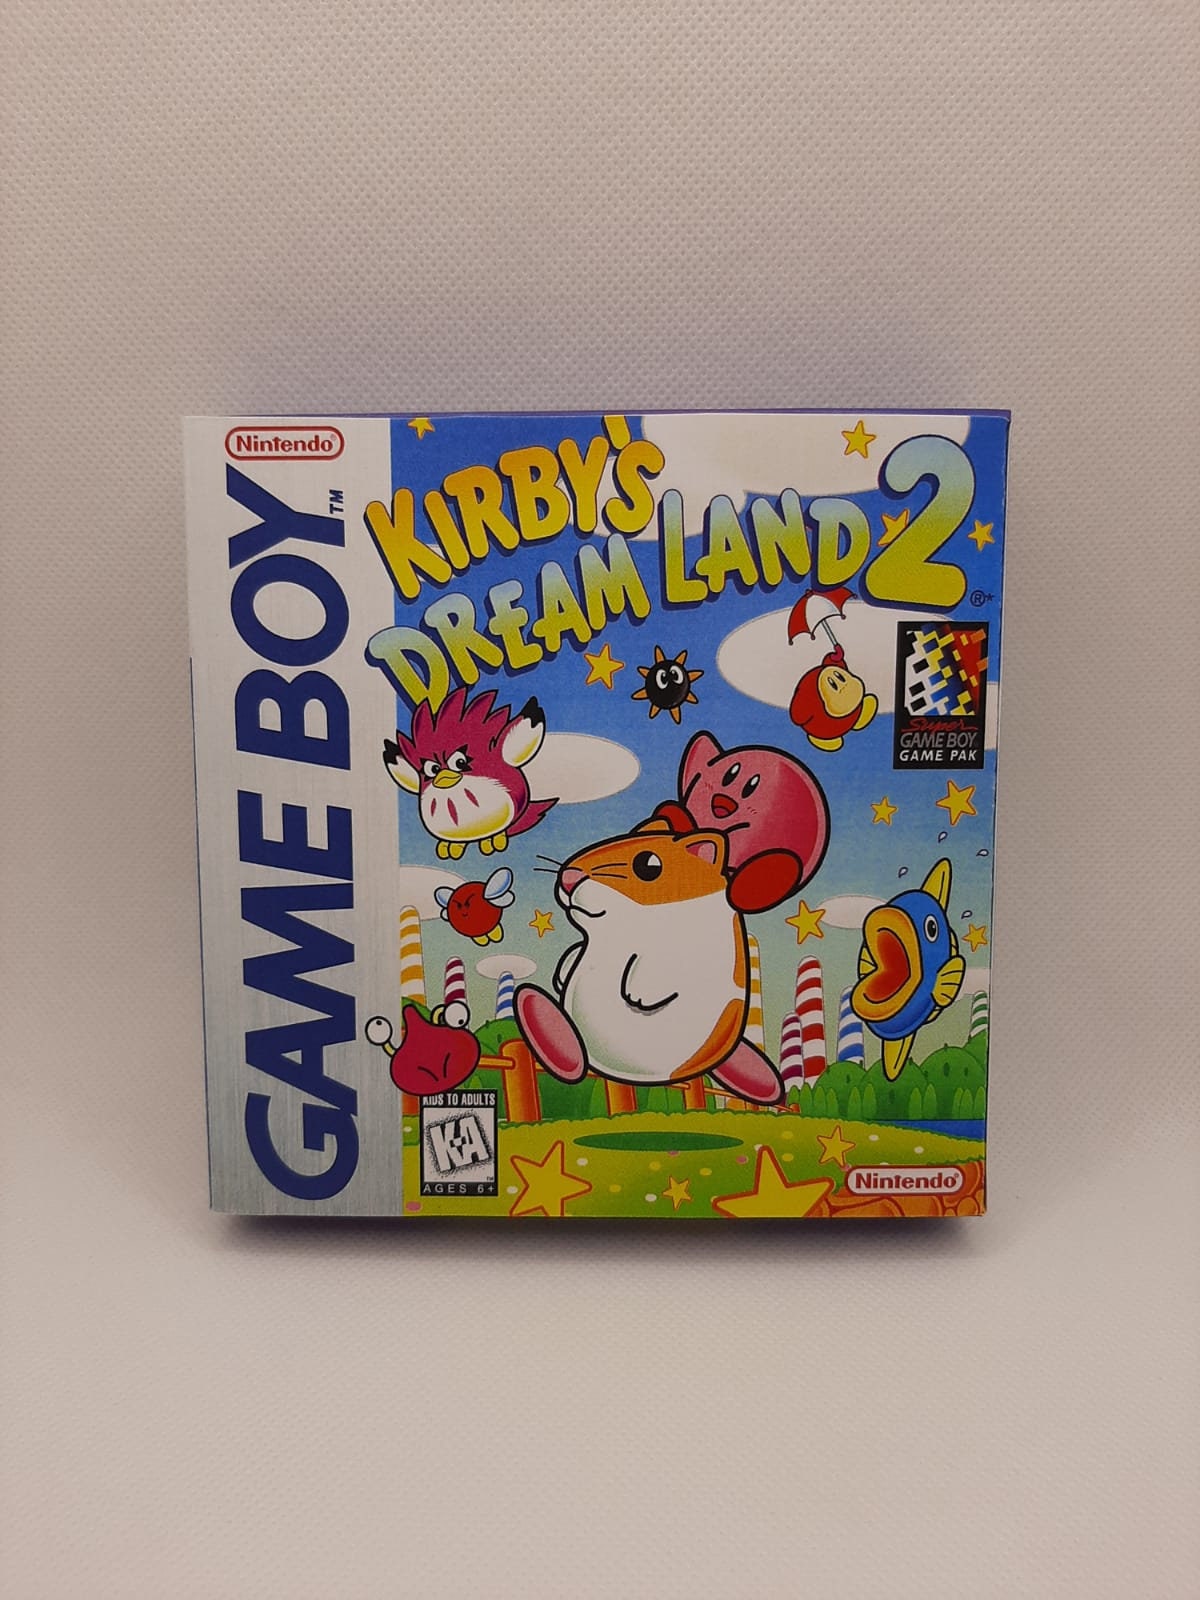 Verslaafde Adolescent Torrent GAME BOY Kirby's Dream Land 2 Box Cover Only - Etsy